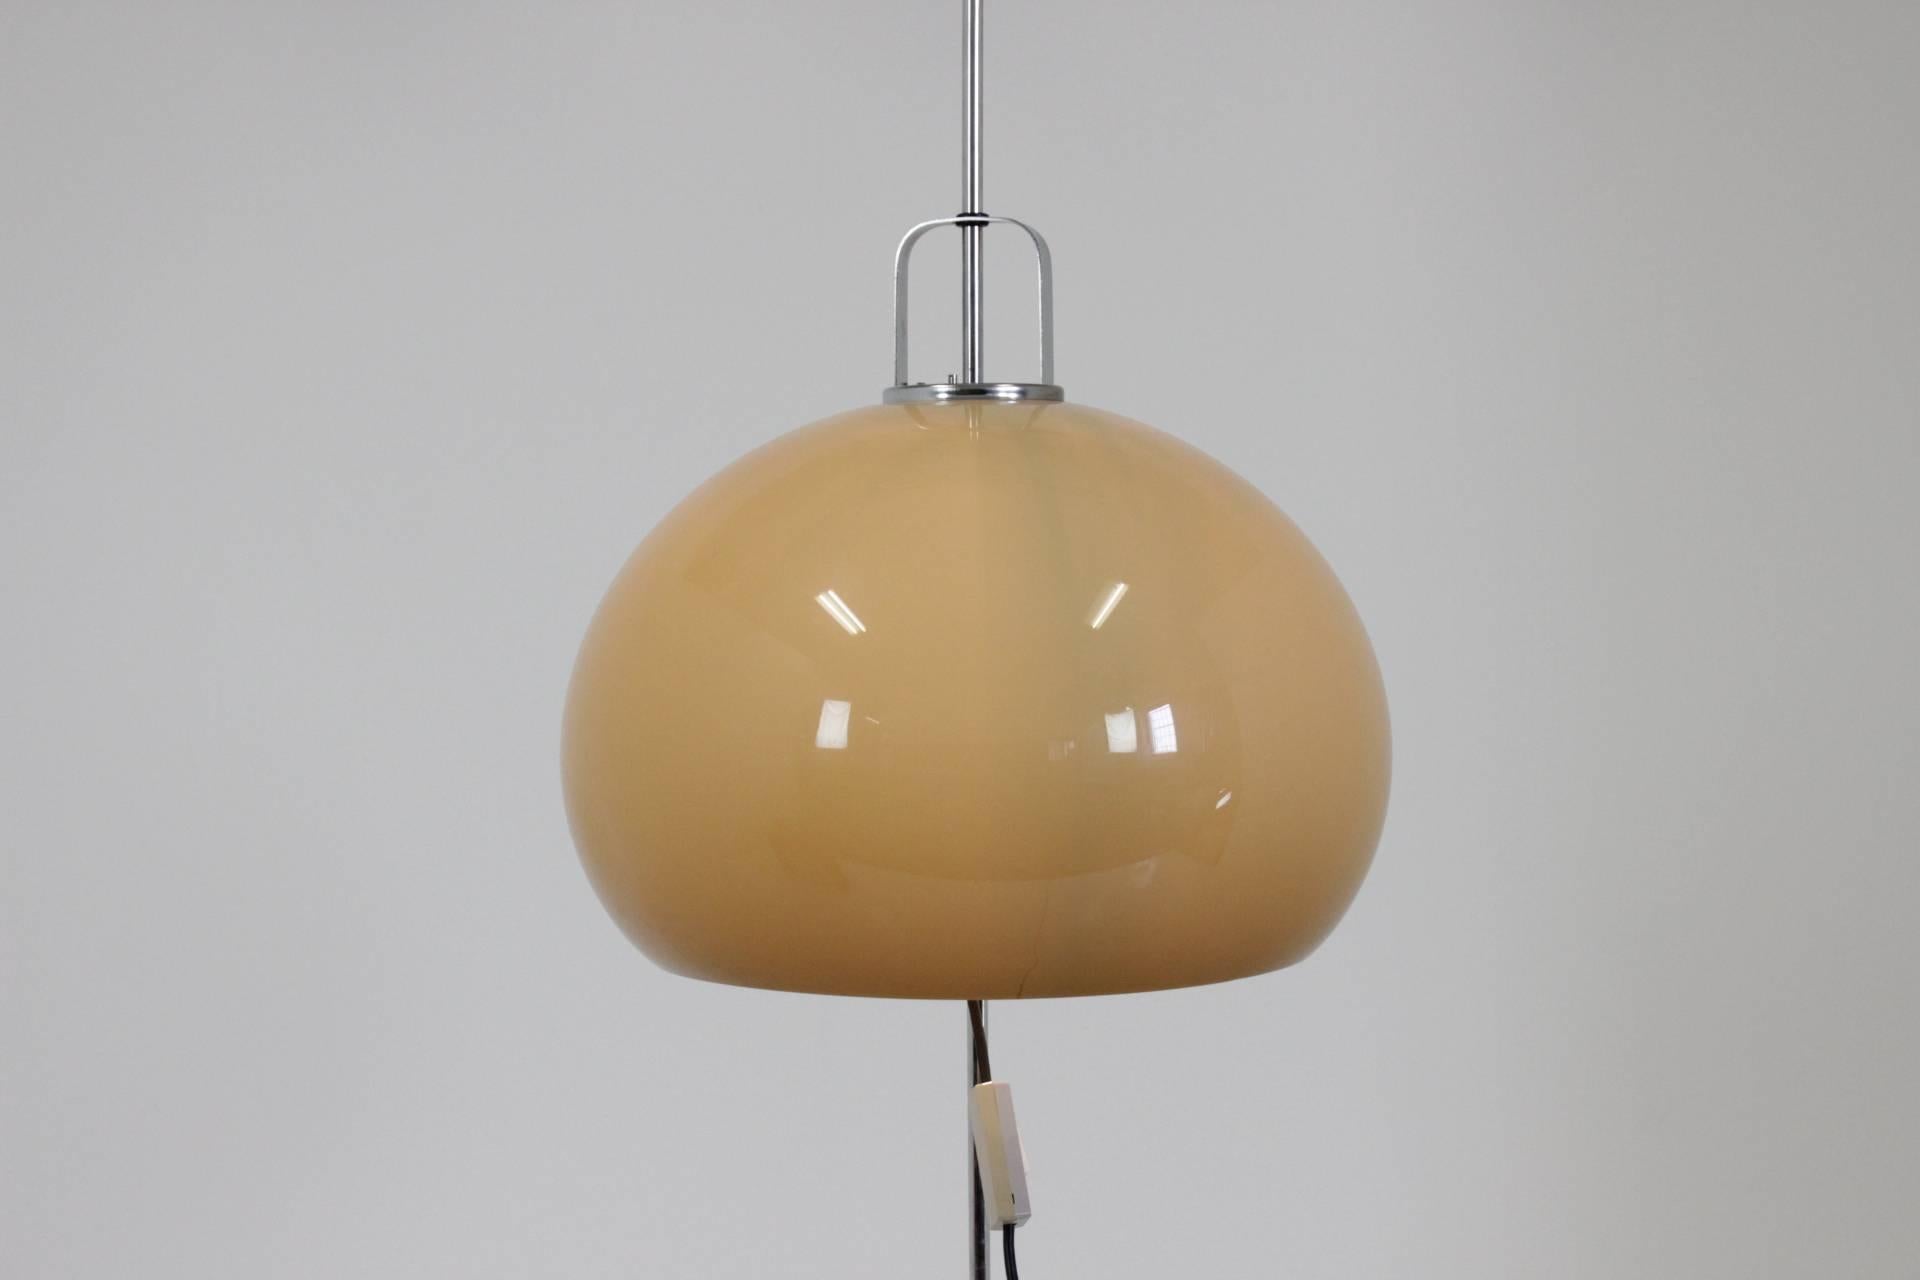 Space Age floor lamp designed by Harvey Guzzini and made by Meblo in good condition.